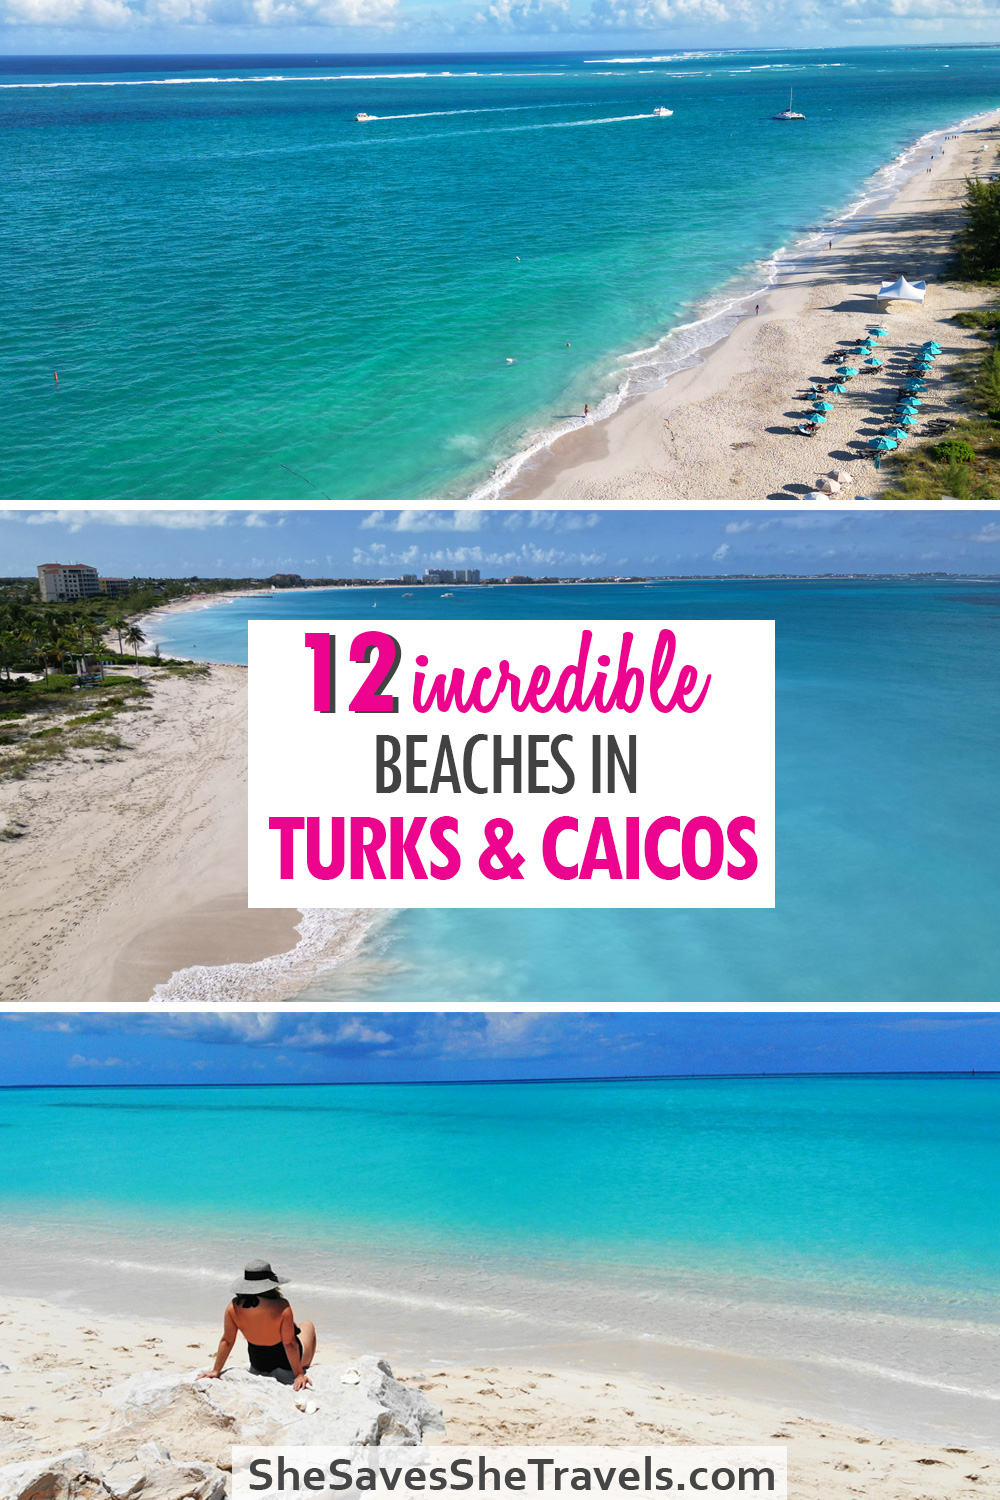 text reads 12 incredible beaches in turks and caicos with 3 photos of beaches with white sand and teal water